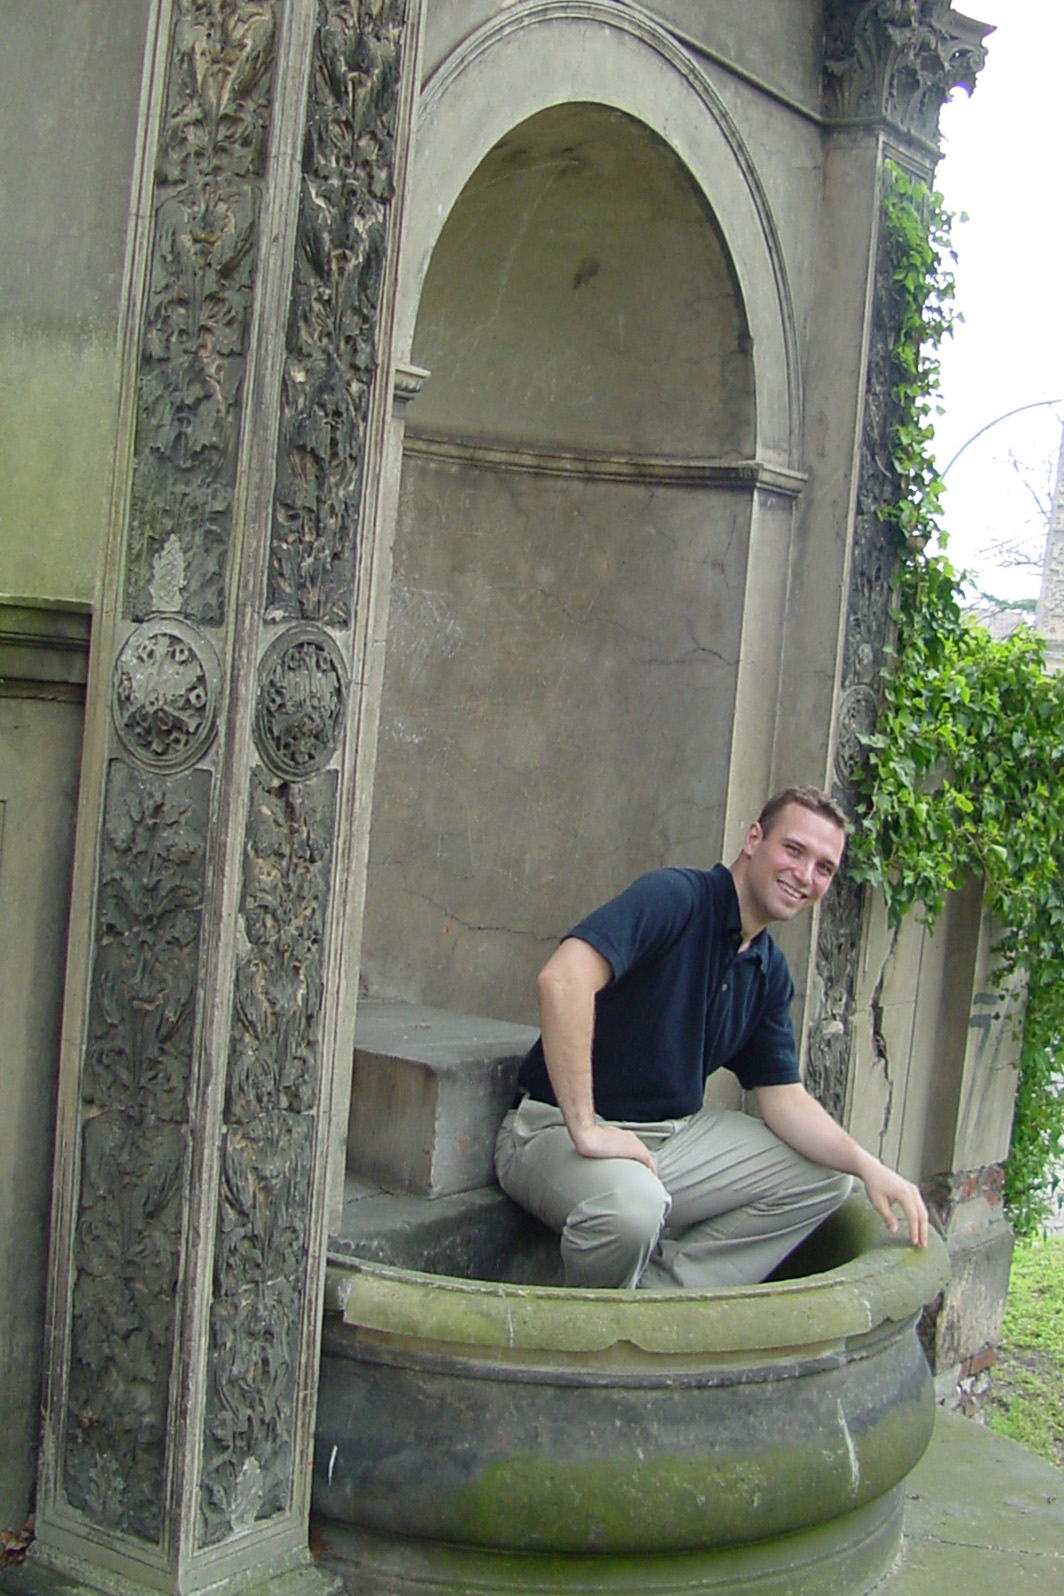 INSPECTED THE FOUNTAIN AT POTSDAM